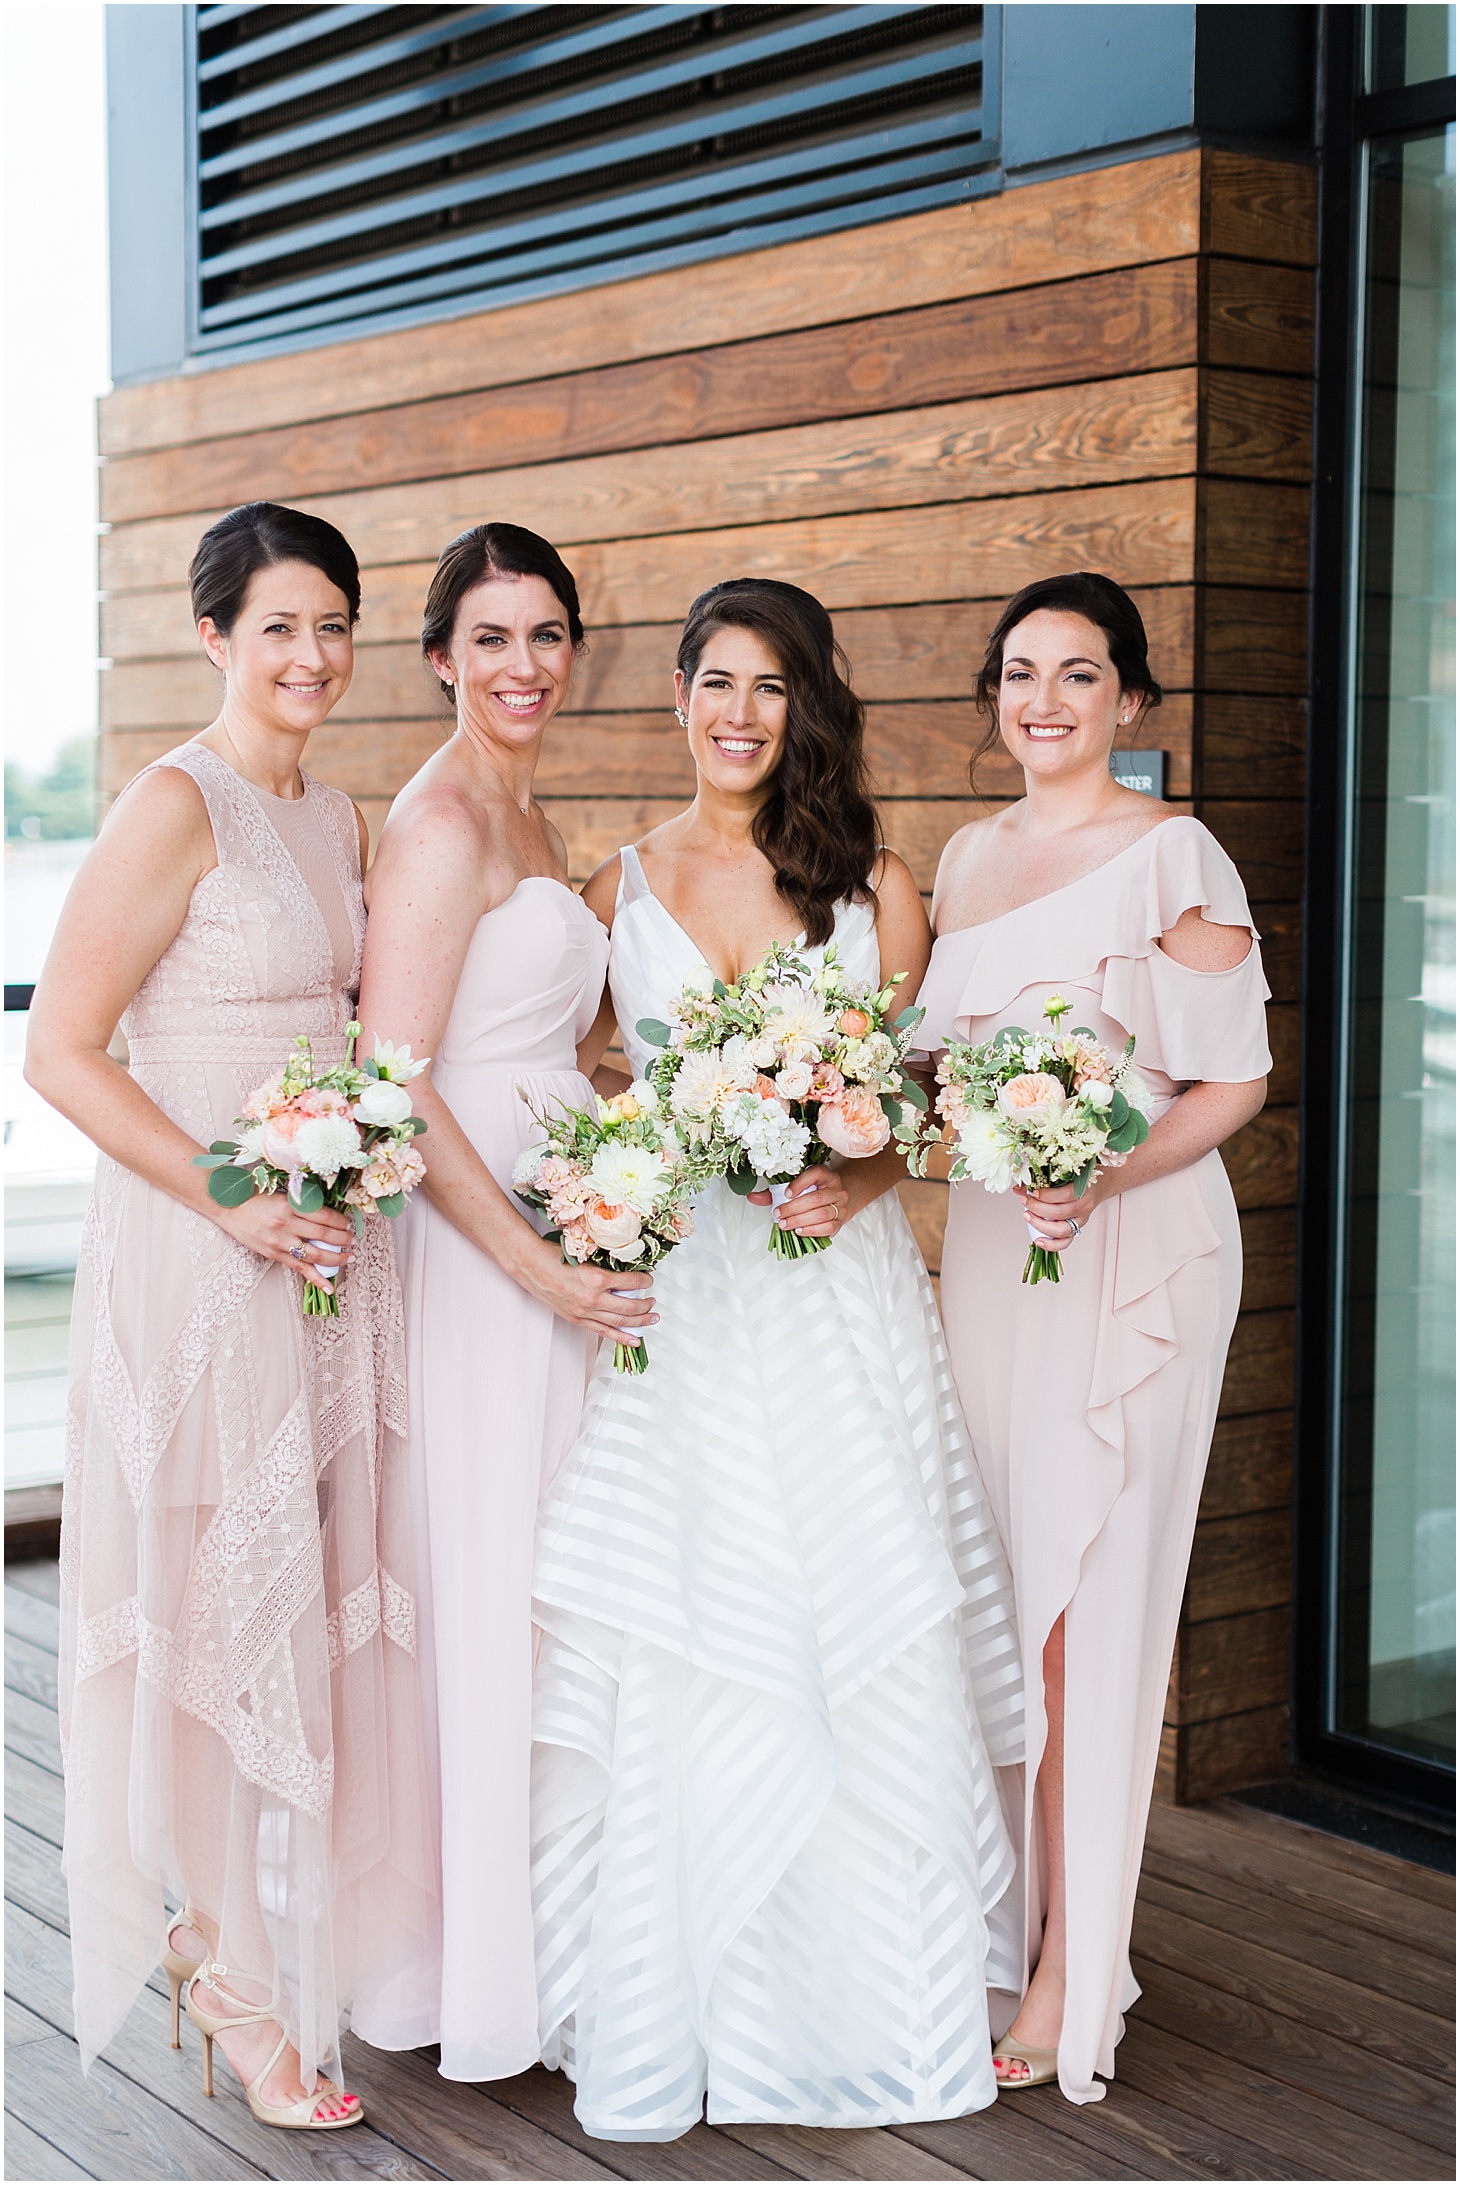 Bridal Party Portraits at District Winery | Hayley Paige Wedding Gown | Chic and Modern Interfaith Wedding in Washington, DC | Sarah Bradshaw Photography